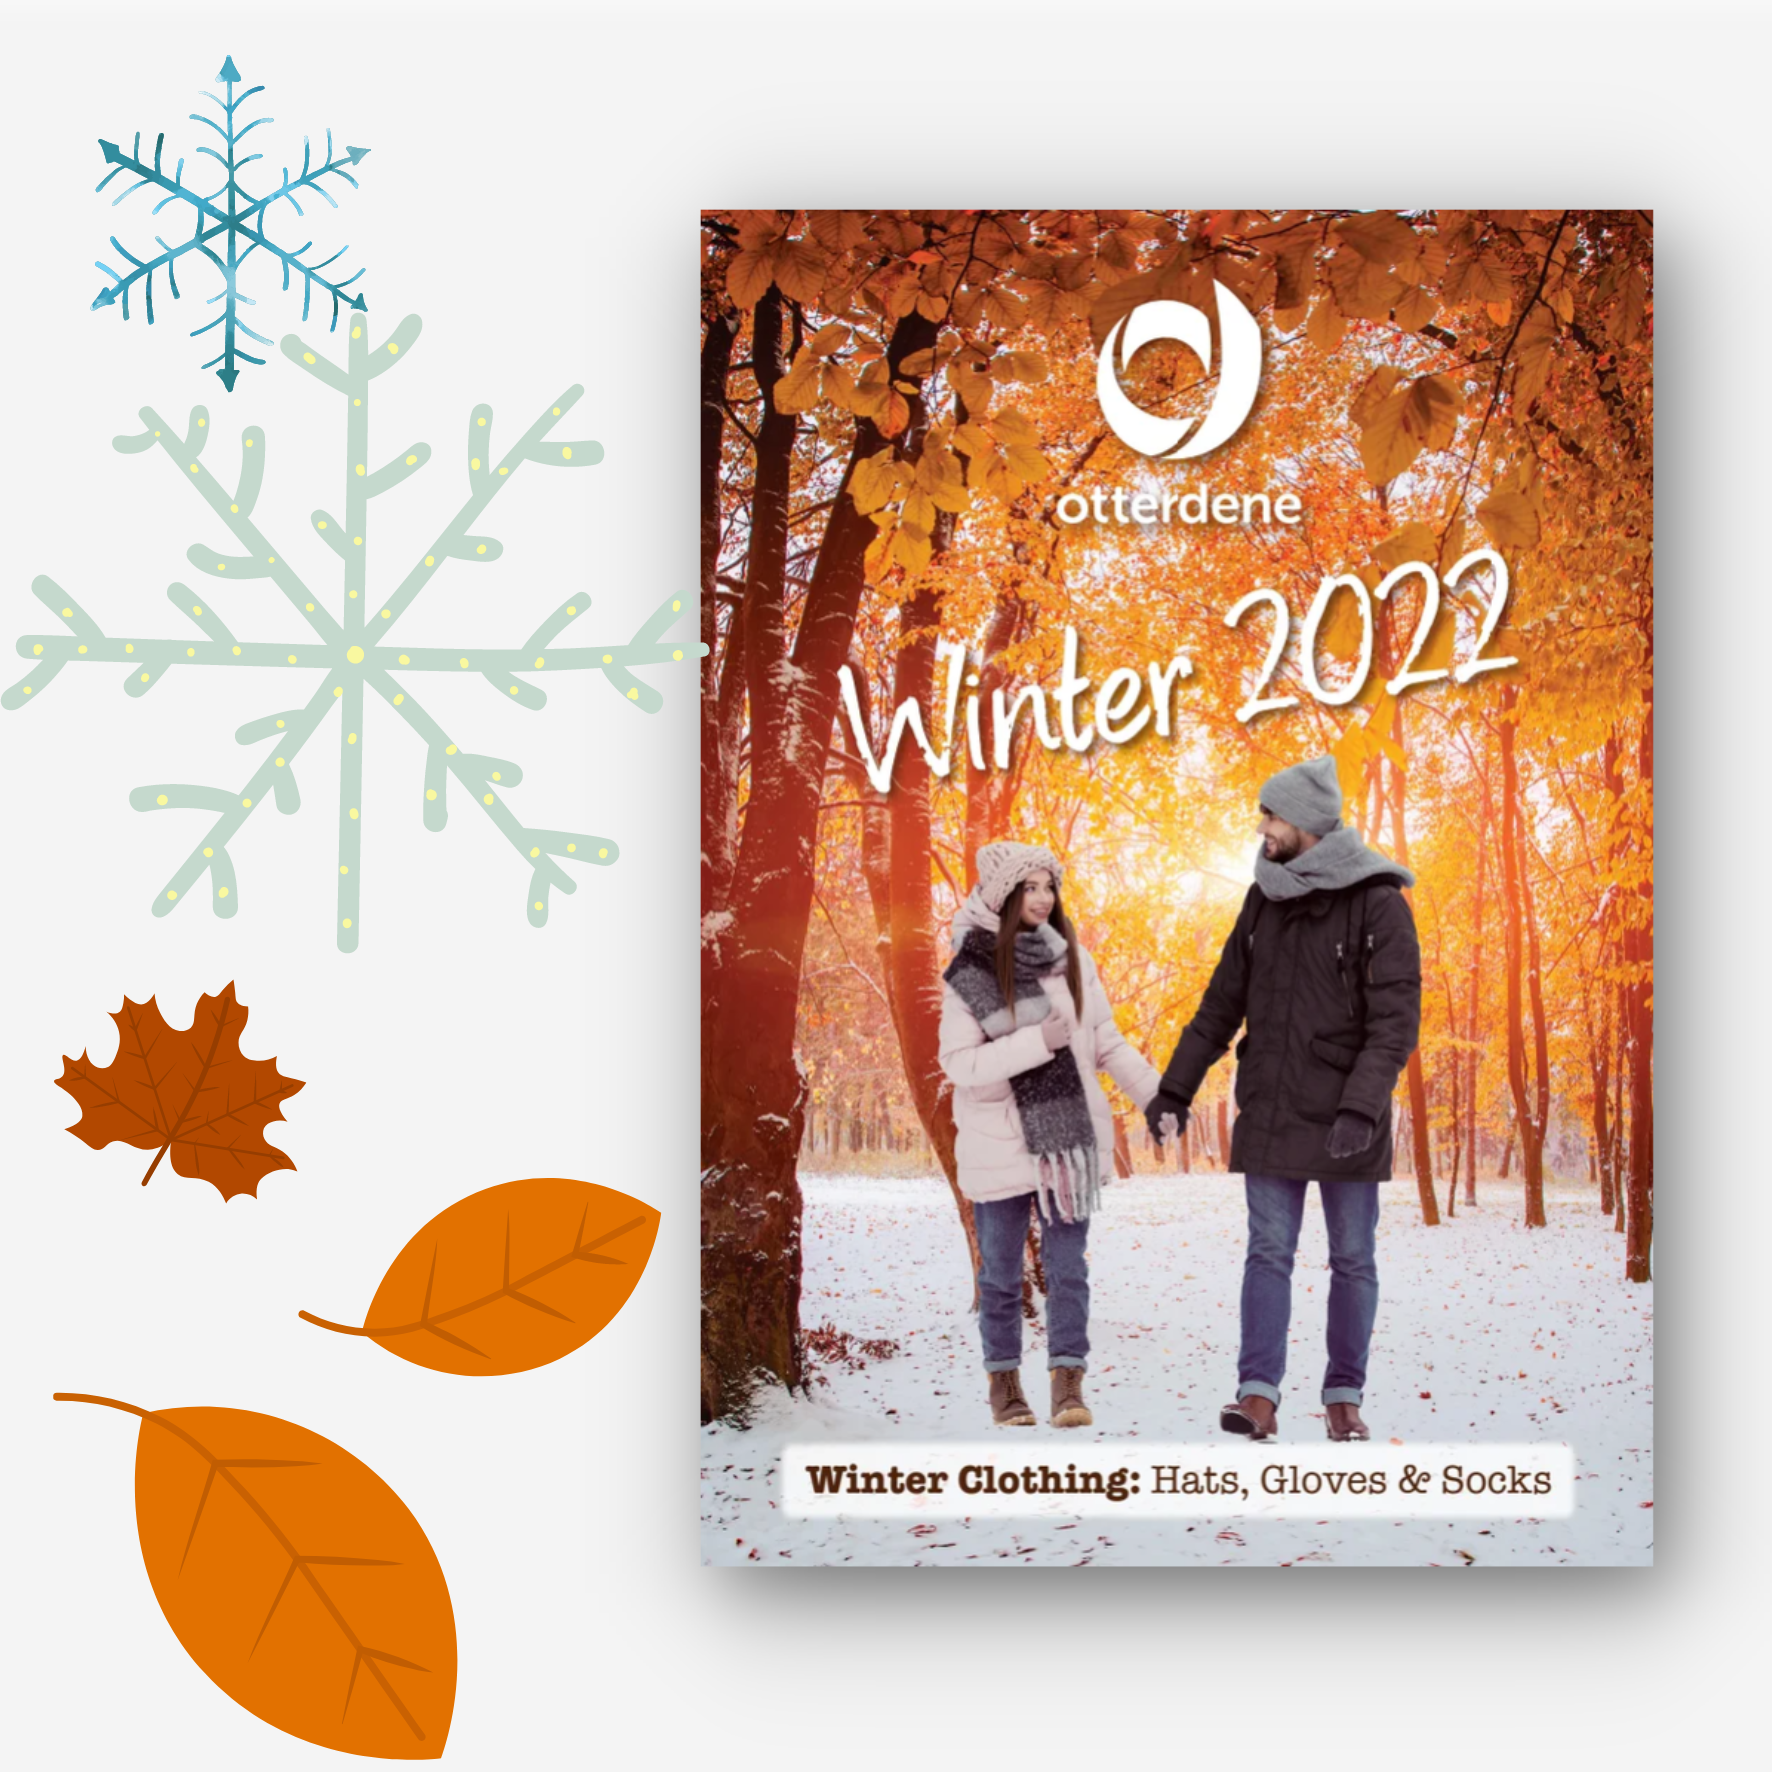 REQUEST THE NEW 2022 WINTER CATALOGUE...